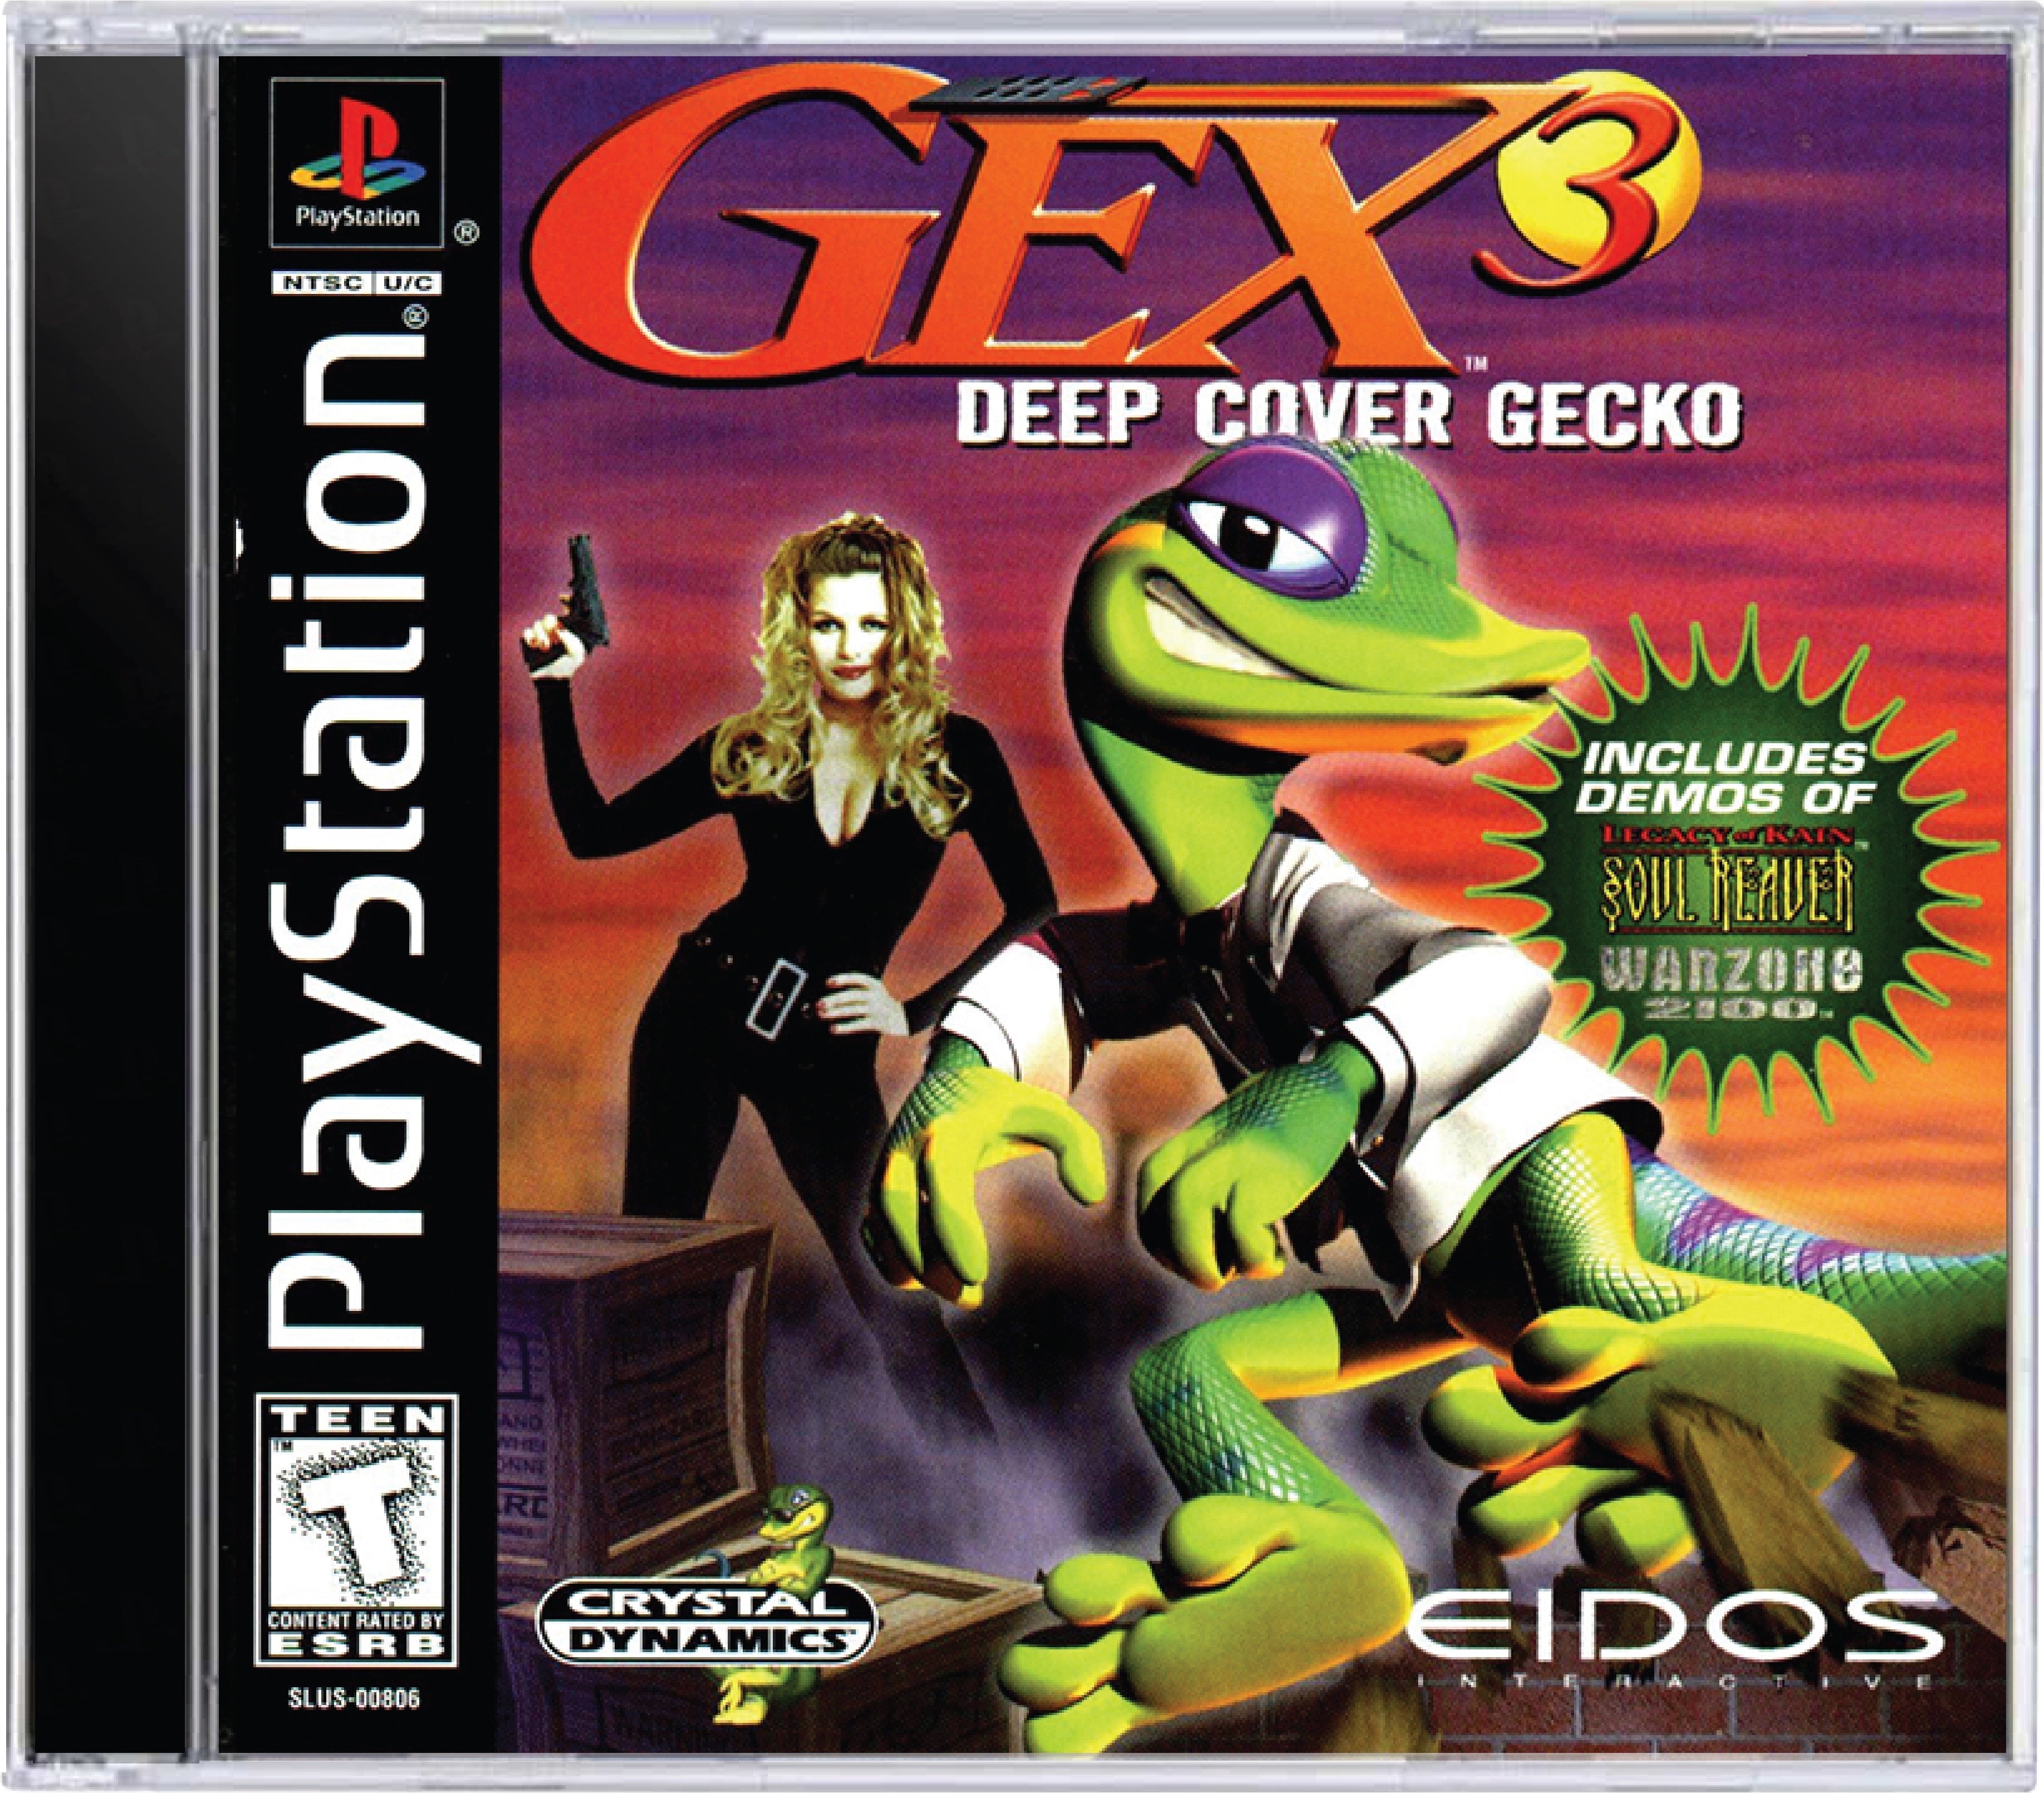 Gex 3 Deep Cover Gecko Cover Art and Product Photo